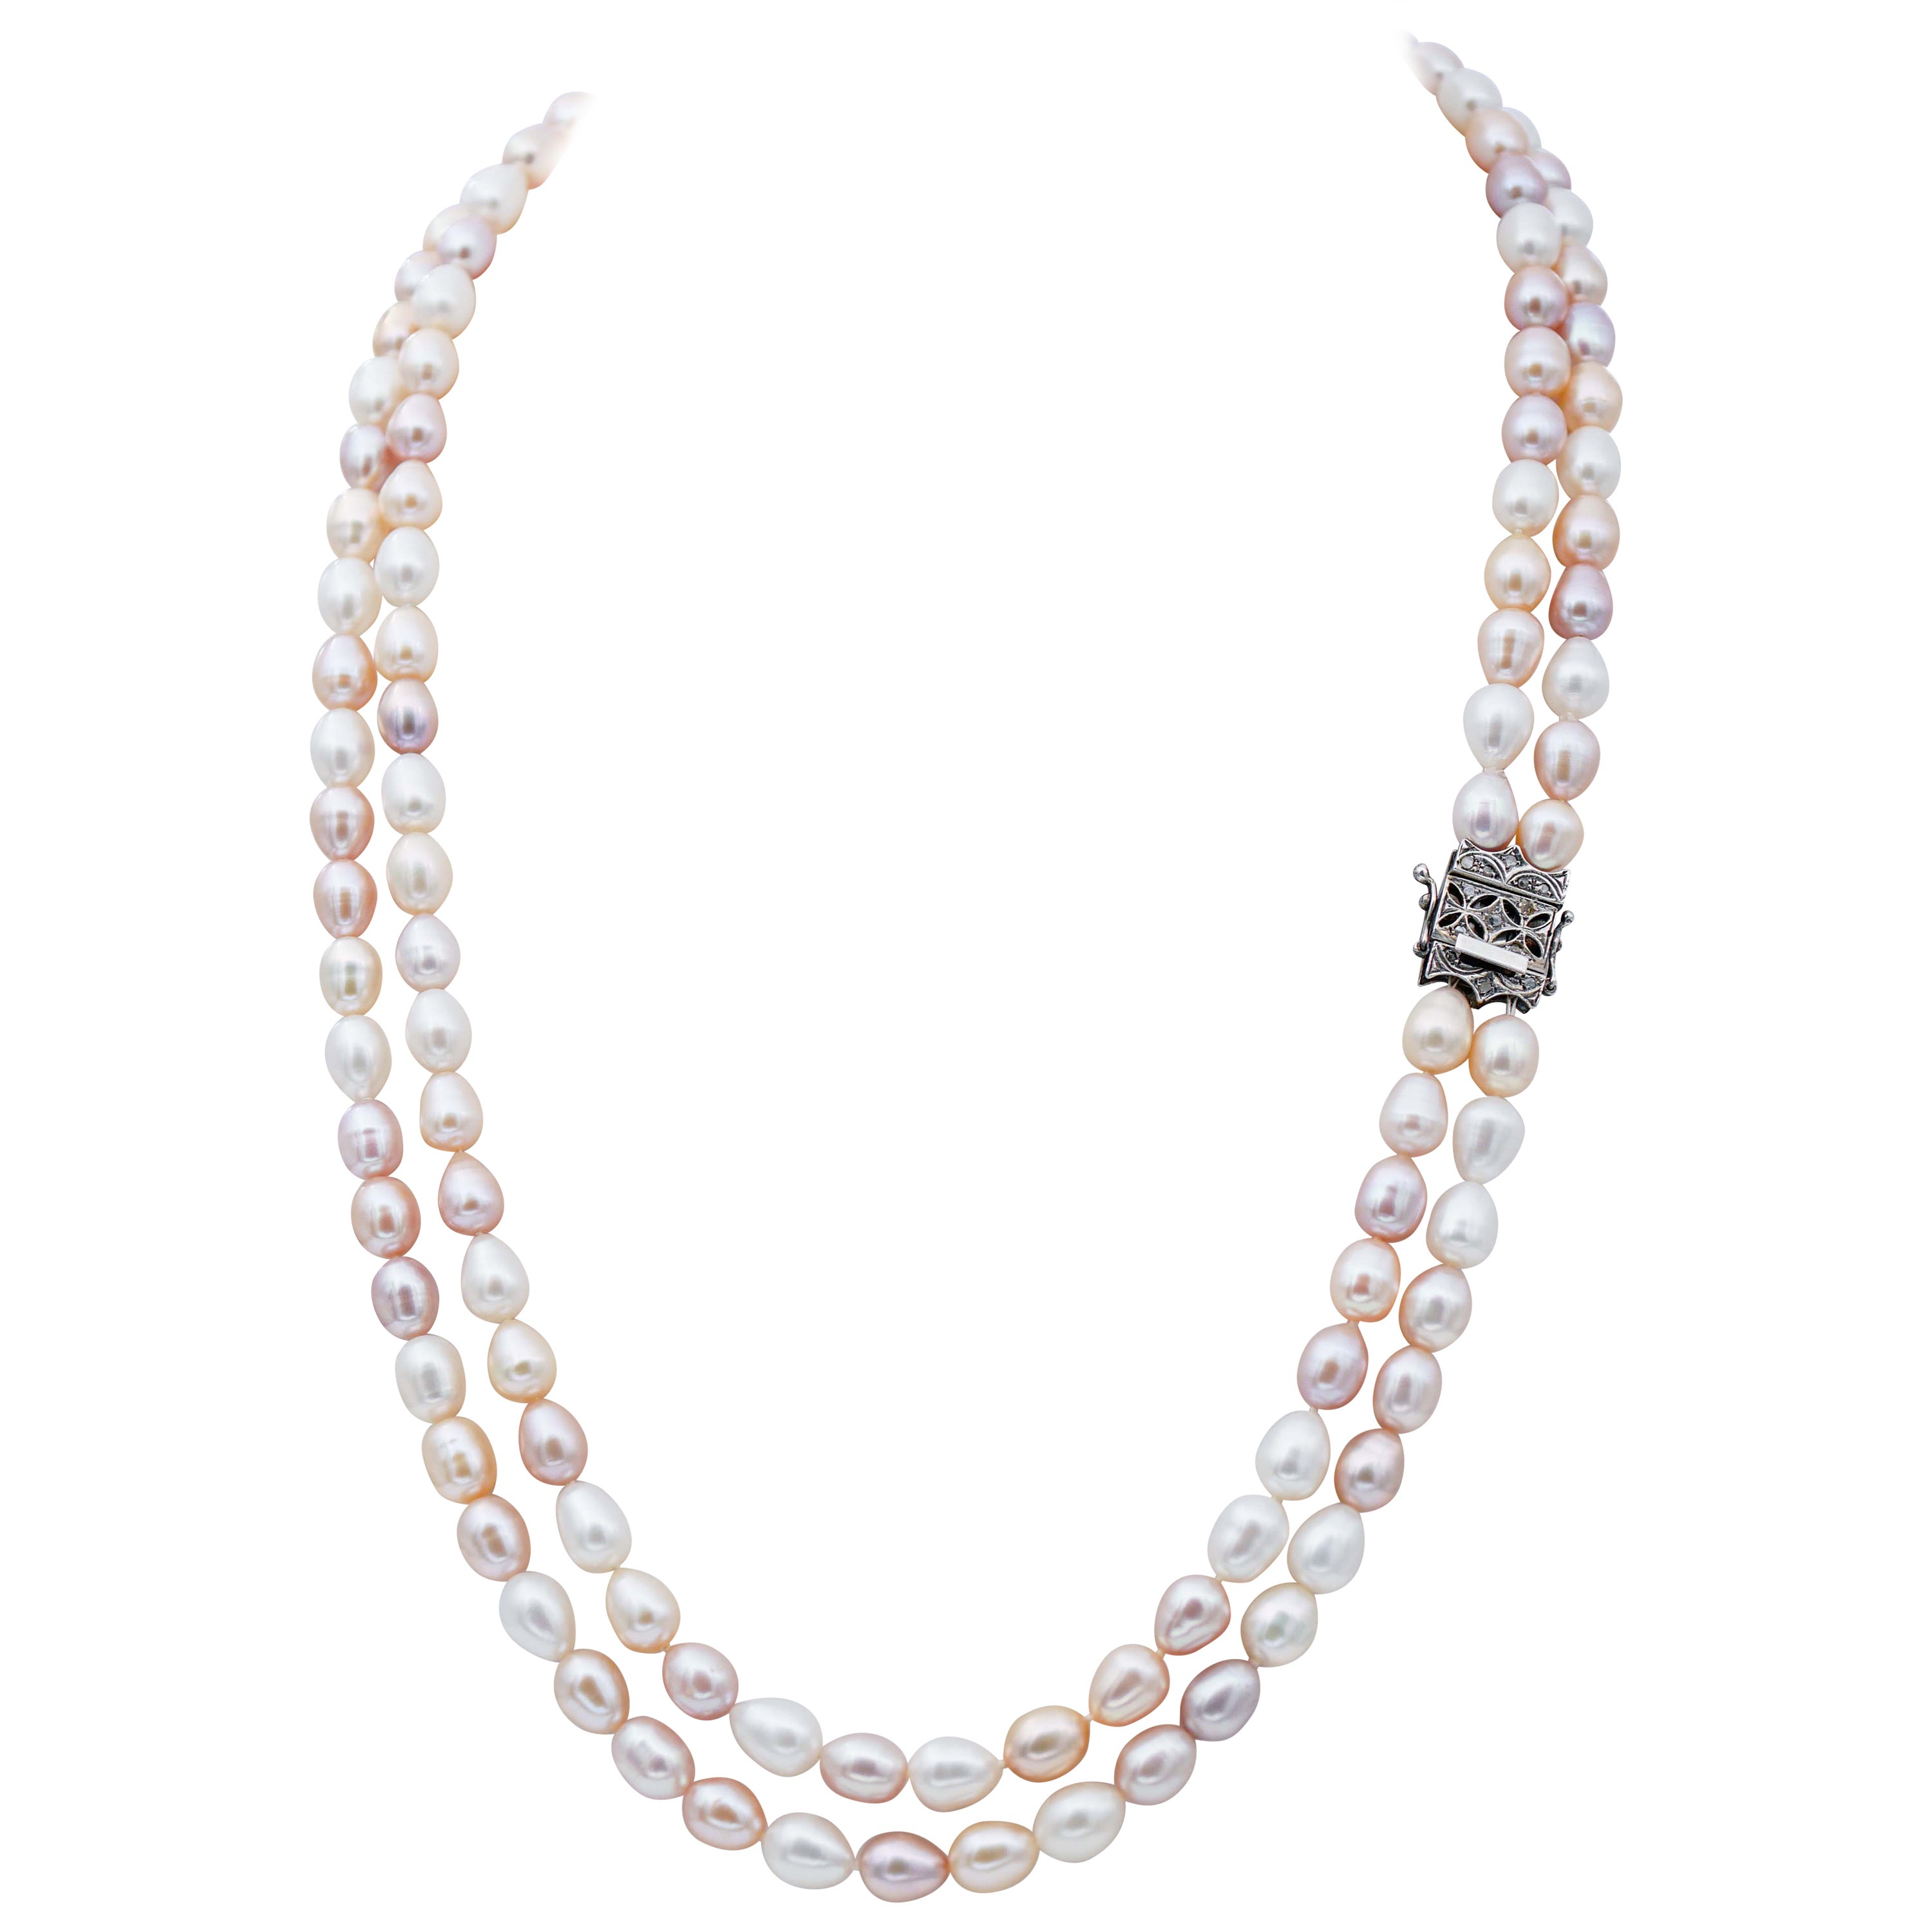 White and Pink Pearls, Diamonds, Rose Gold and Silver Multi-Strands Necklace